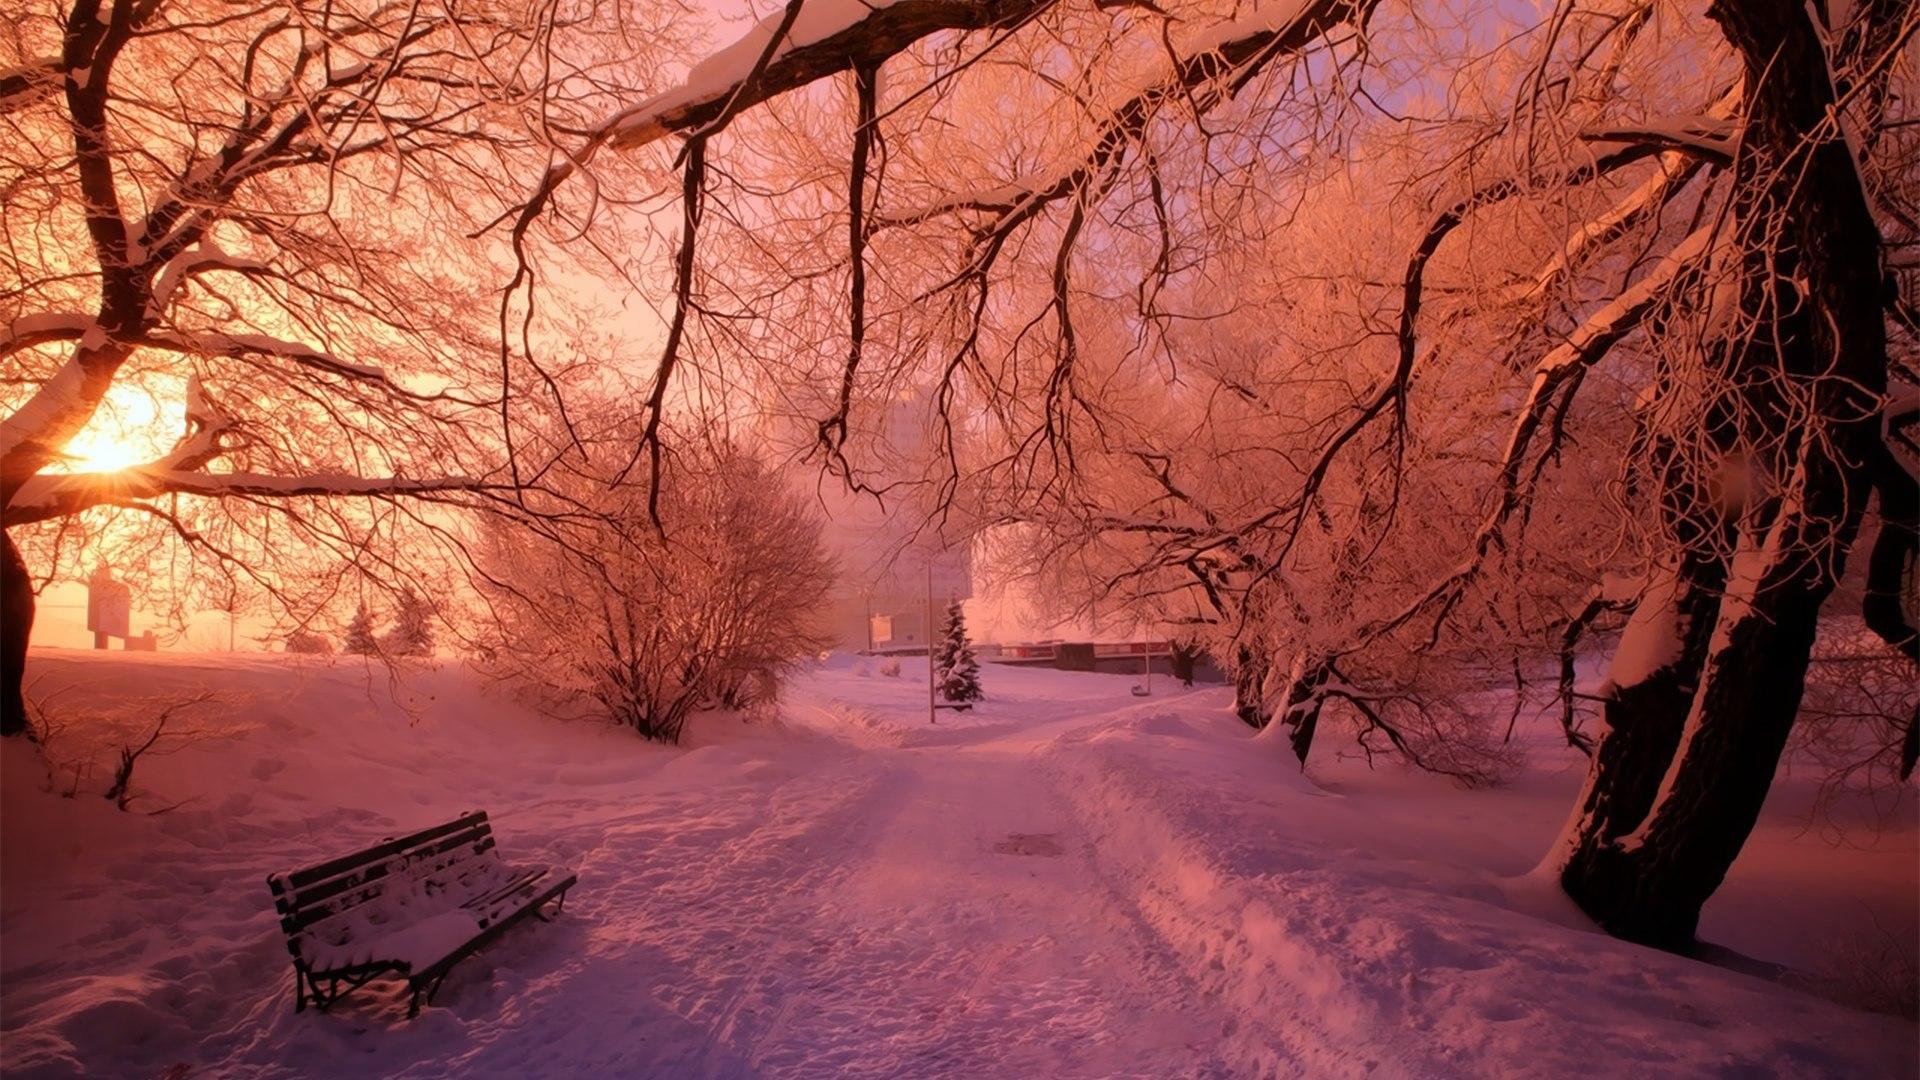 Pink snow in winter park wallpaper and image